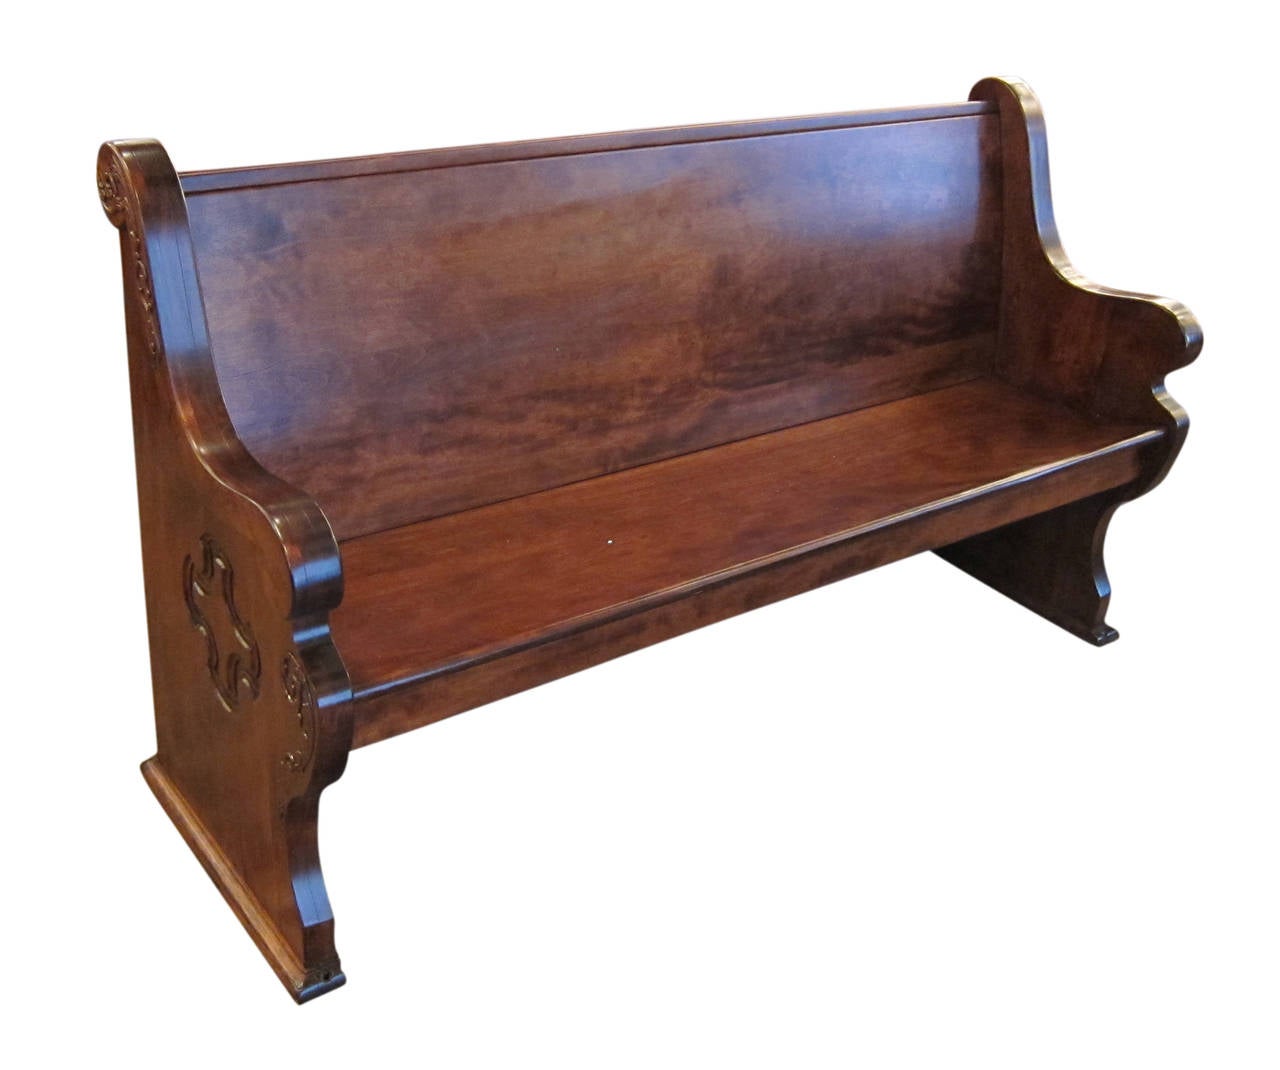 Restored with mahogany stain. This item can be viewed at our 149 Madison Avenue location in Manhattan.